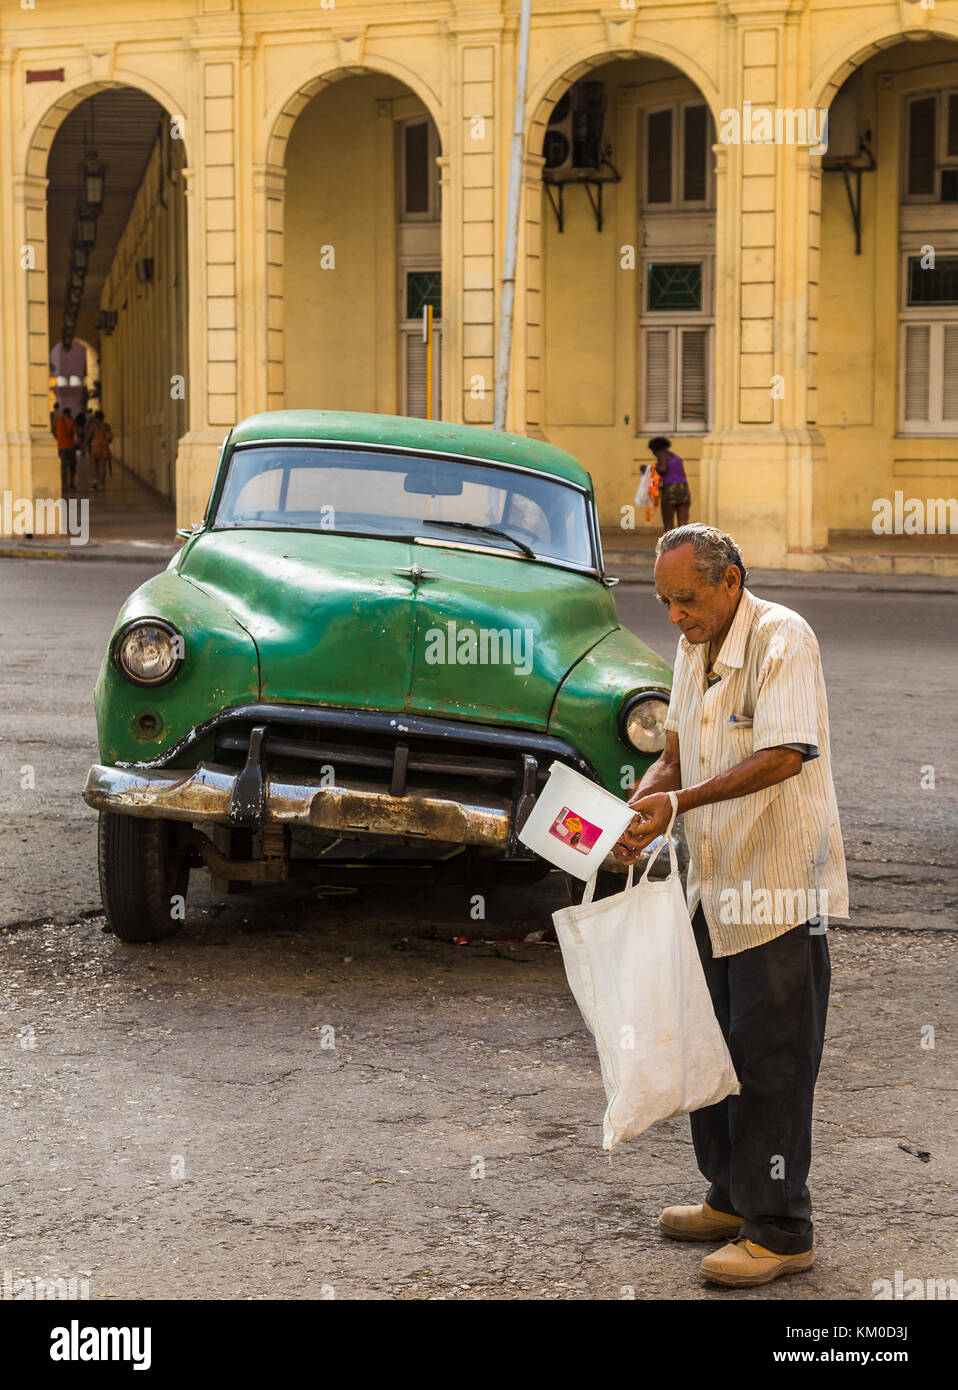 A man seeing collecting plastic objects to fill a bag on the streets of Havana during the summer of 2014. Stock Photo